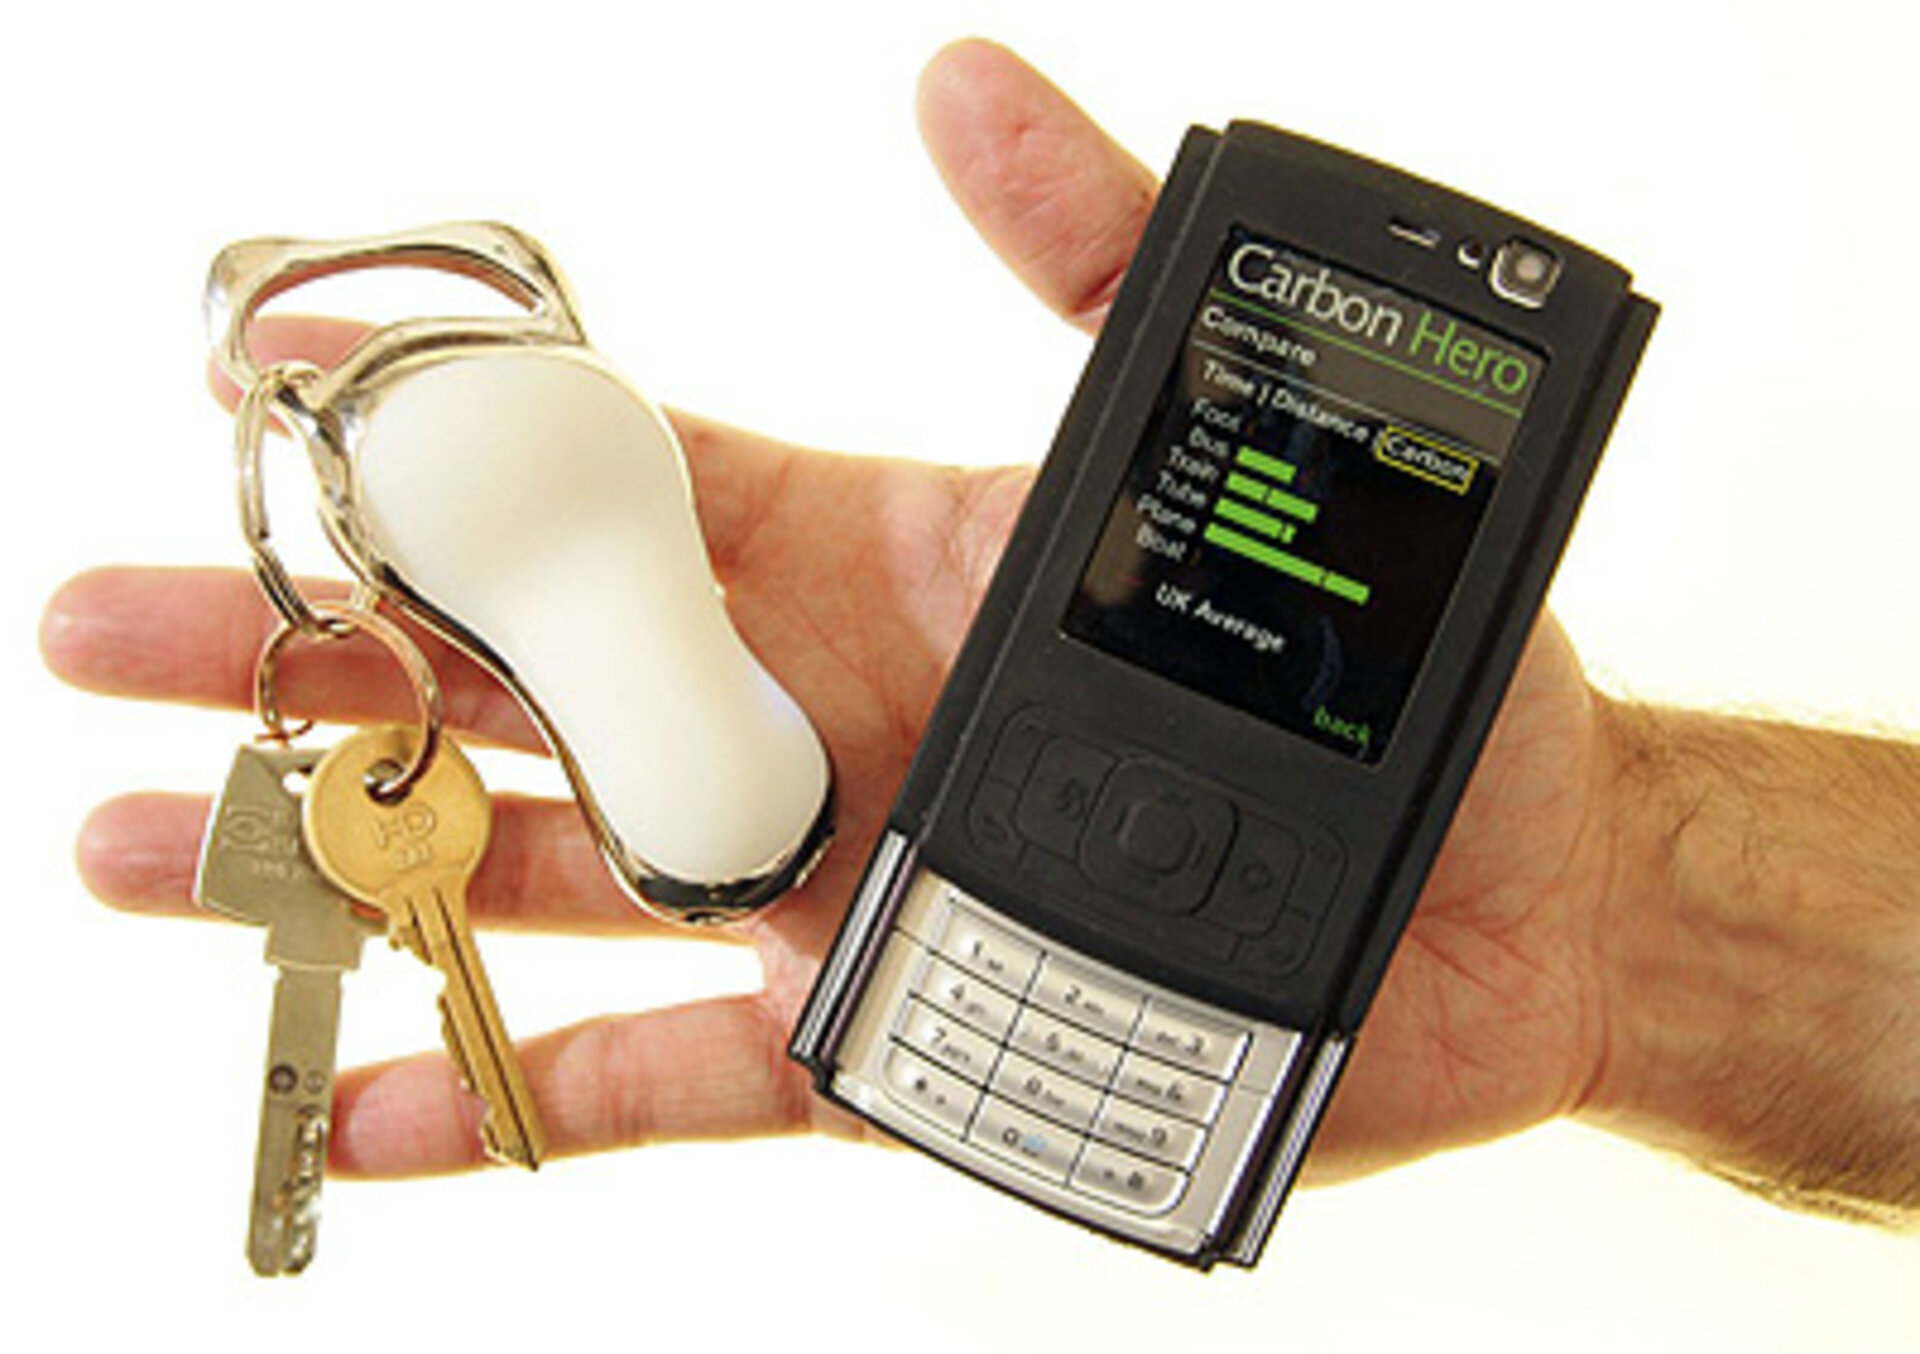 Carbon Hero, a key ring sensor displays the carbon footprint on a mobile phone<br> 